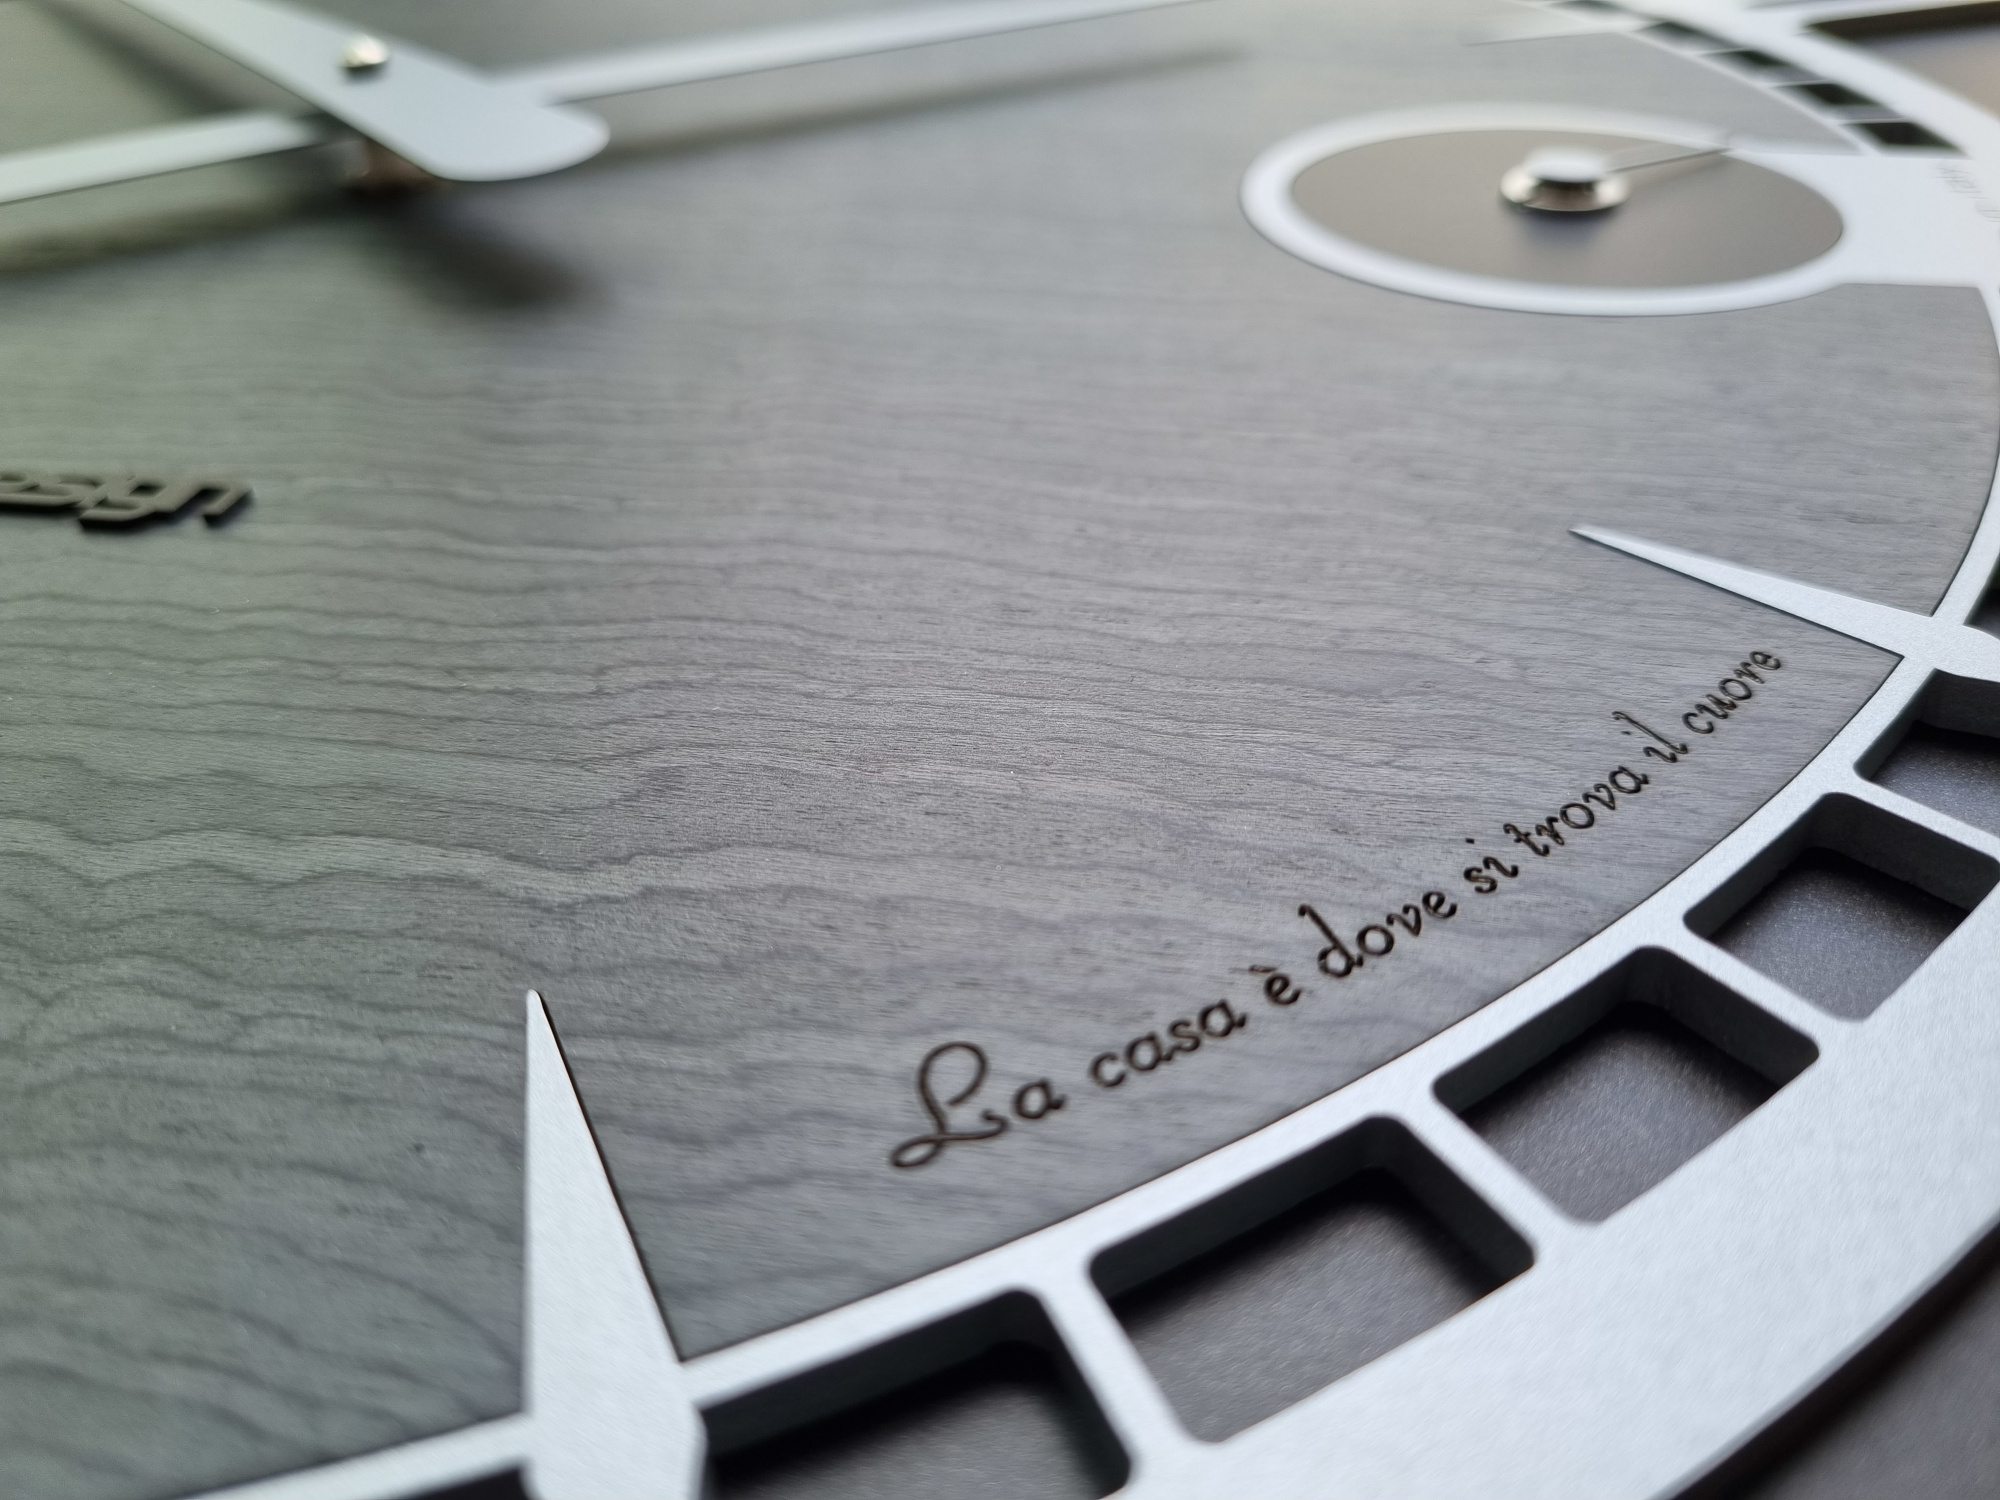 Personalised gift wall clock with dedication on the dial